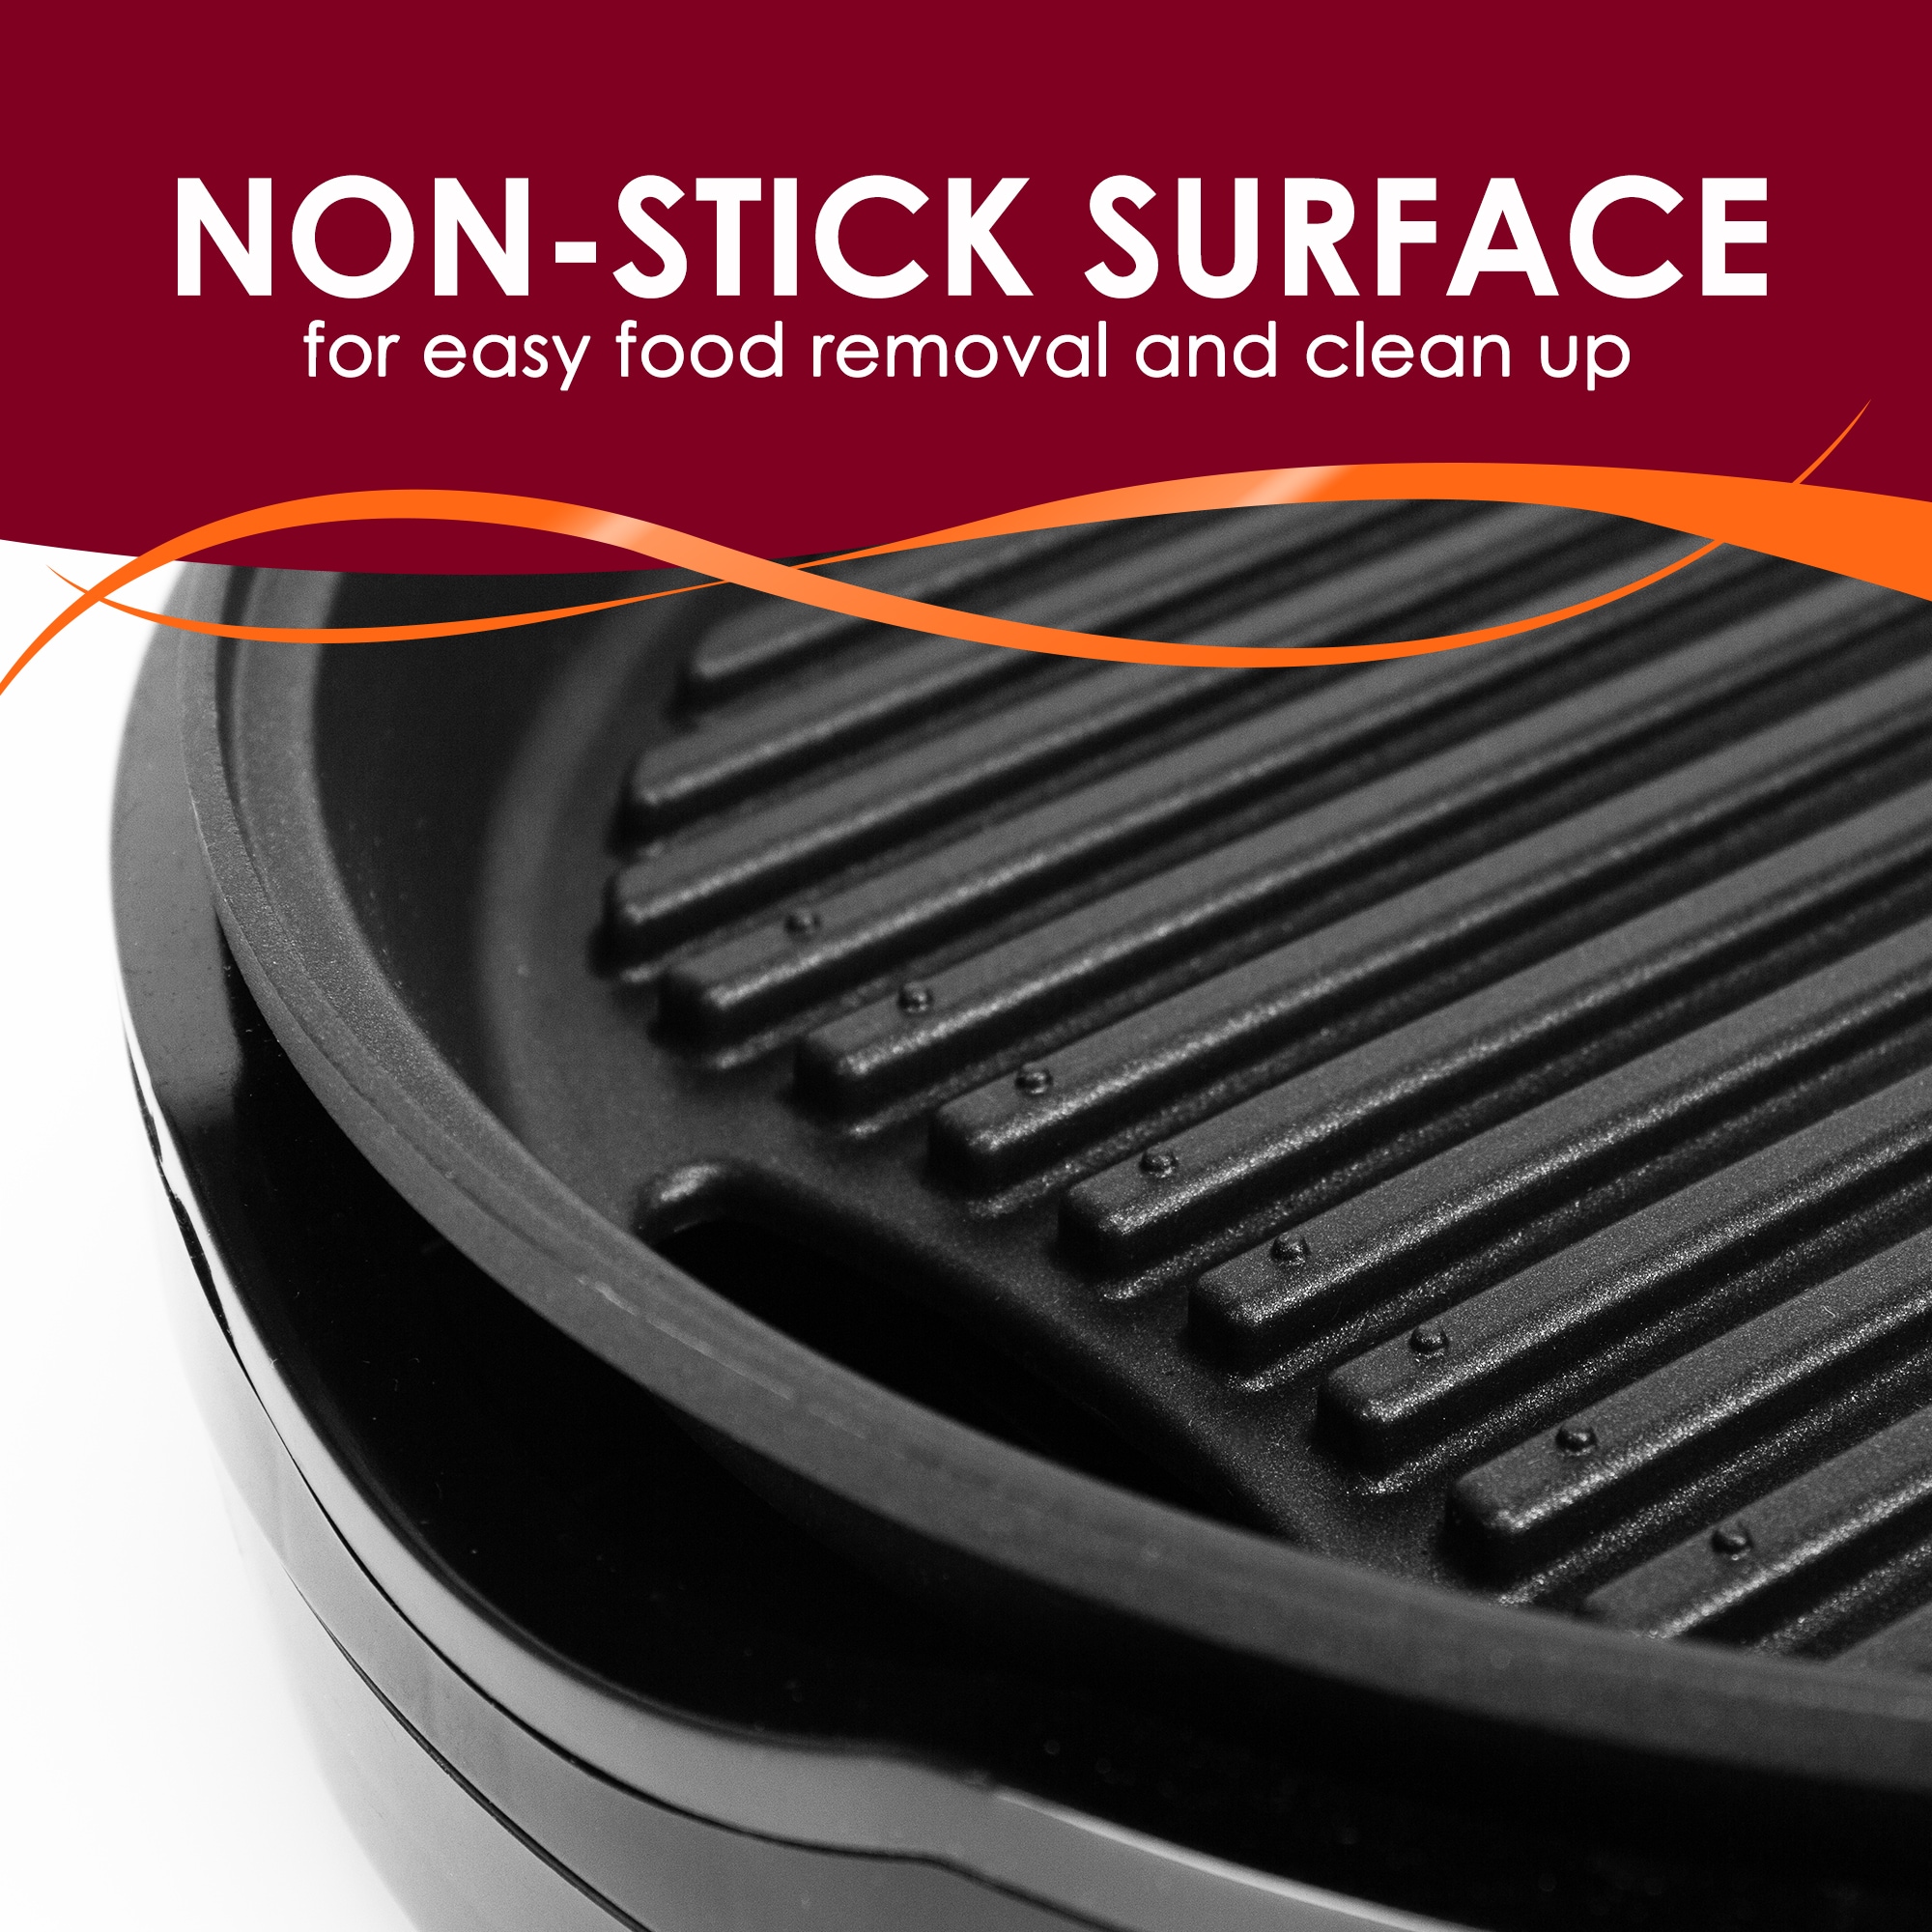  Elite Gourmet EGL-3450 Smokeless Indoor Electric BBQ Grill  Dishwasher Safe, Nonstick, Adjustable Temperature, Fast Heat Up, Low-Fat  Meals Easy to Clean Design, Black: Contact Grills: Home & Kitchen